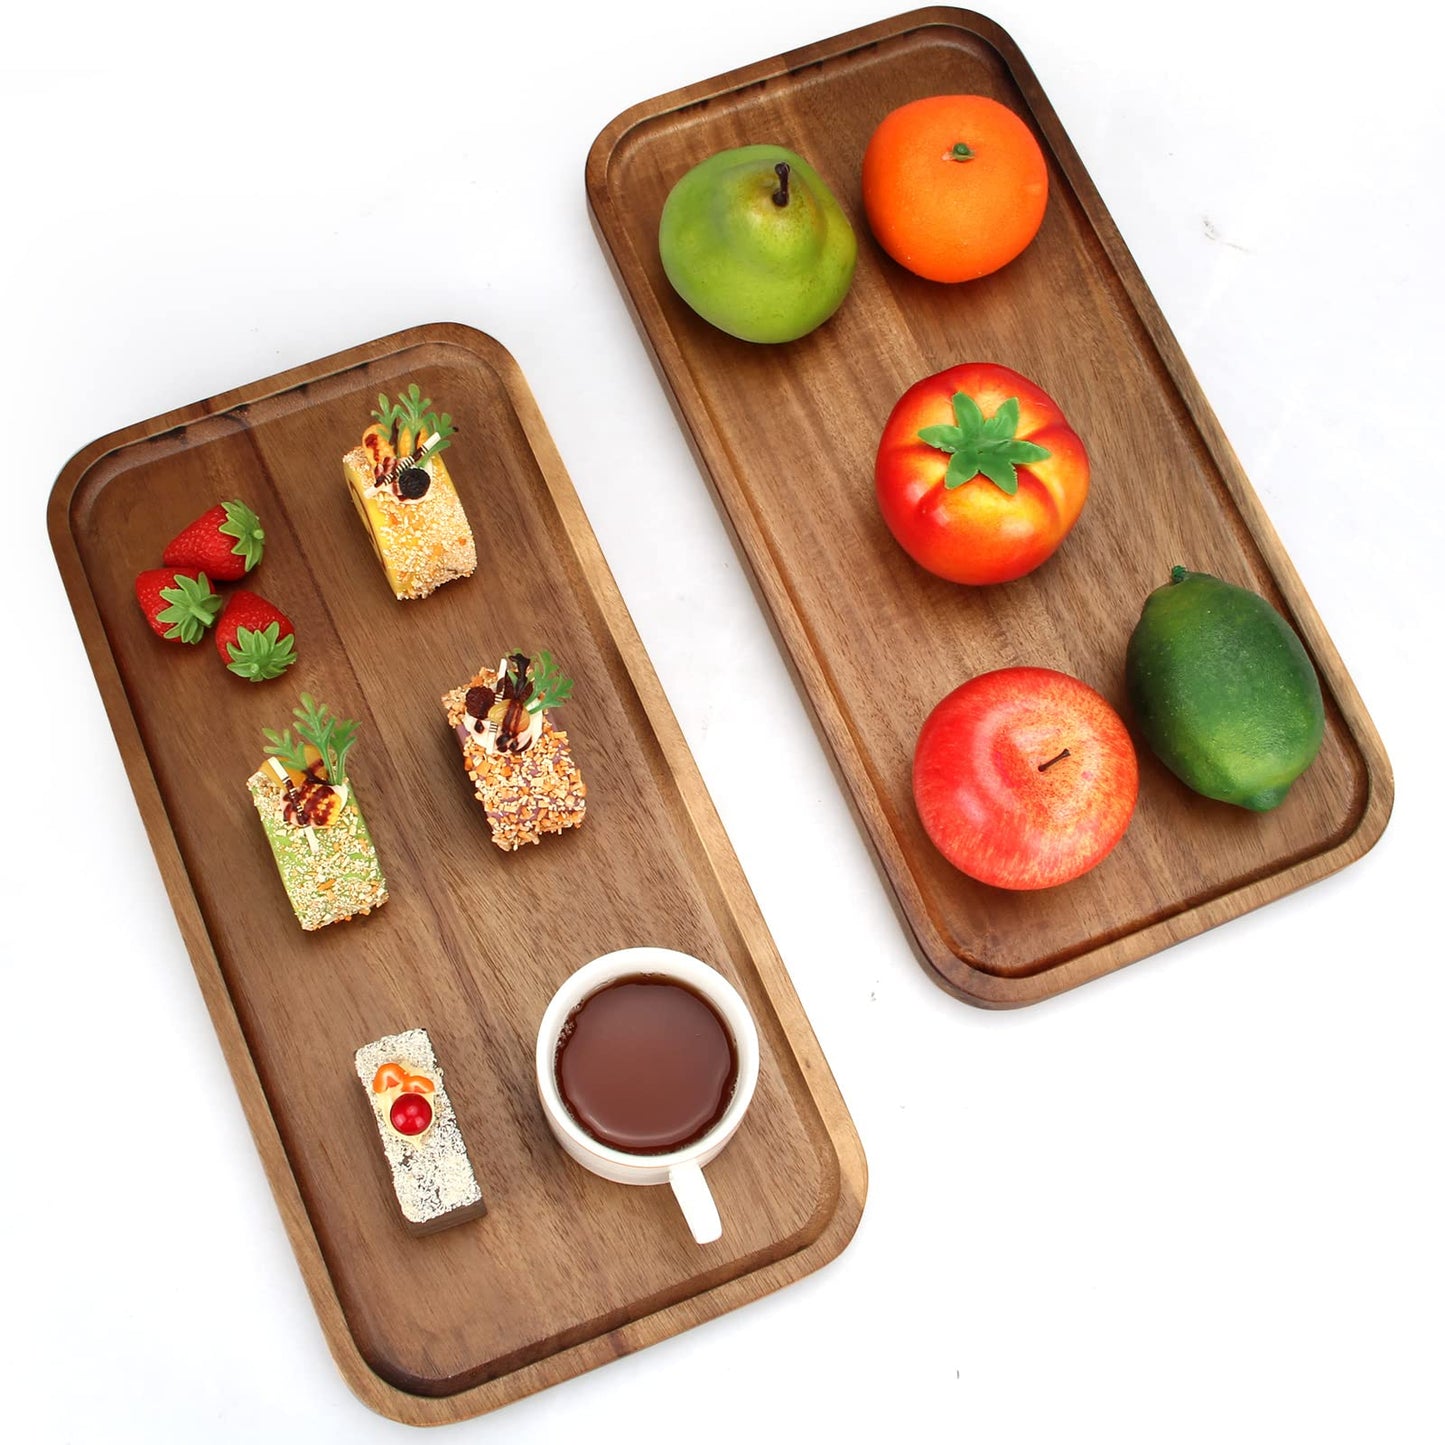 2 Pcs Rectangular Wooden Platters for Food Party Appetizer Fruit Serving Tray for Decor 16" x 8" Large Acacia Wood Cheese Charcuterie Board Rectangle